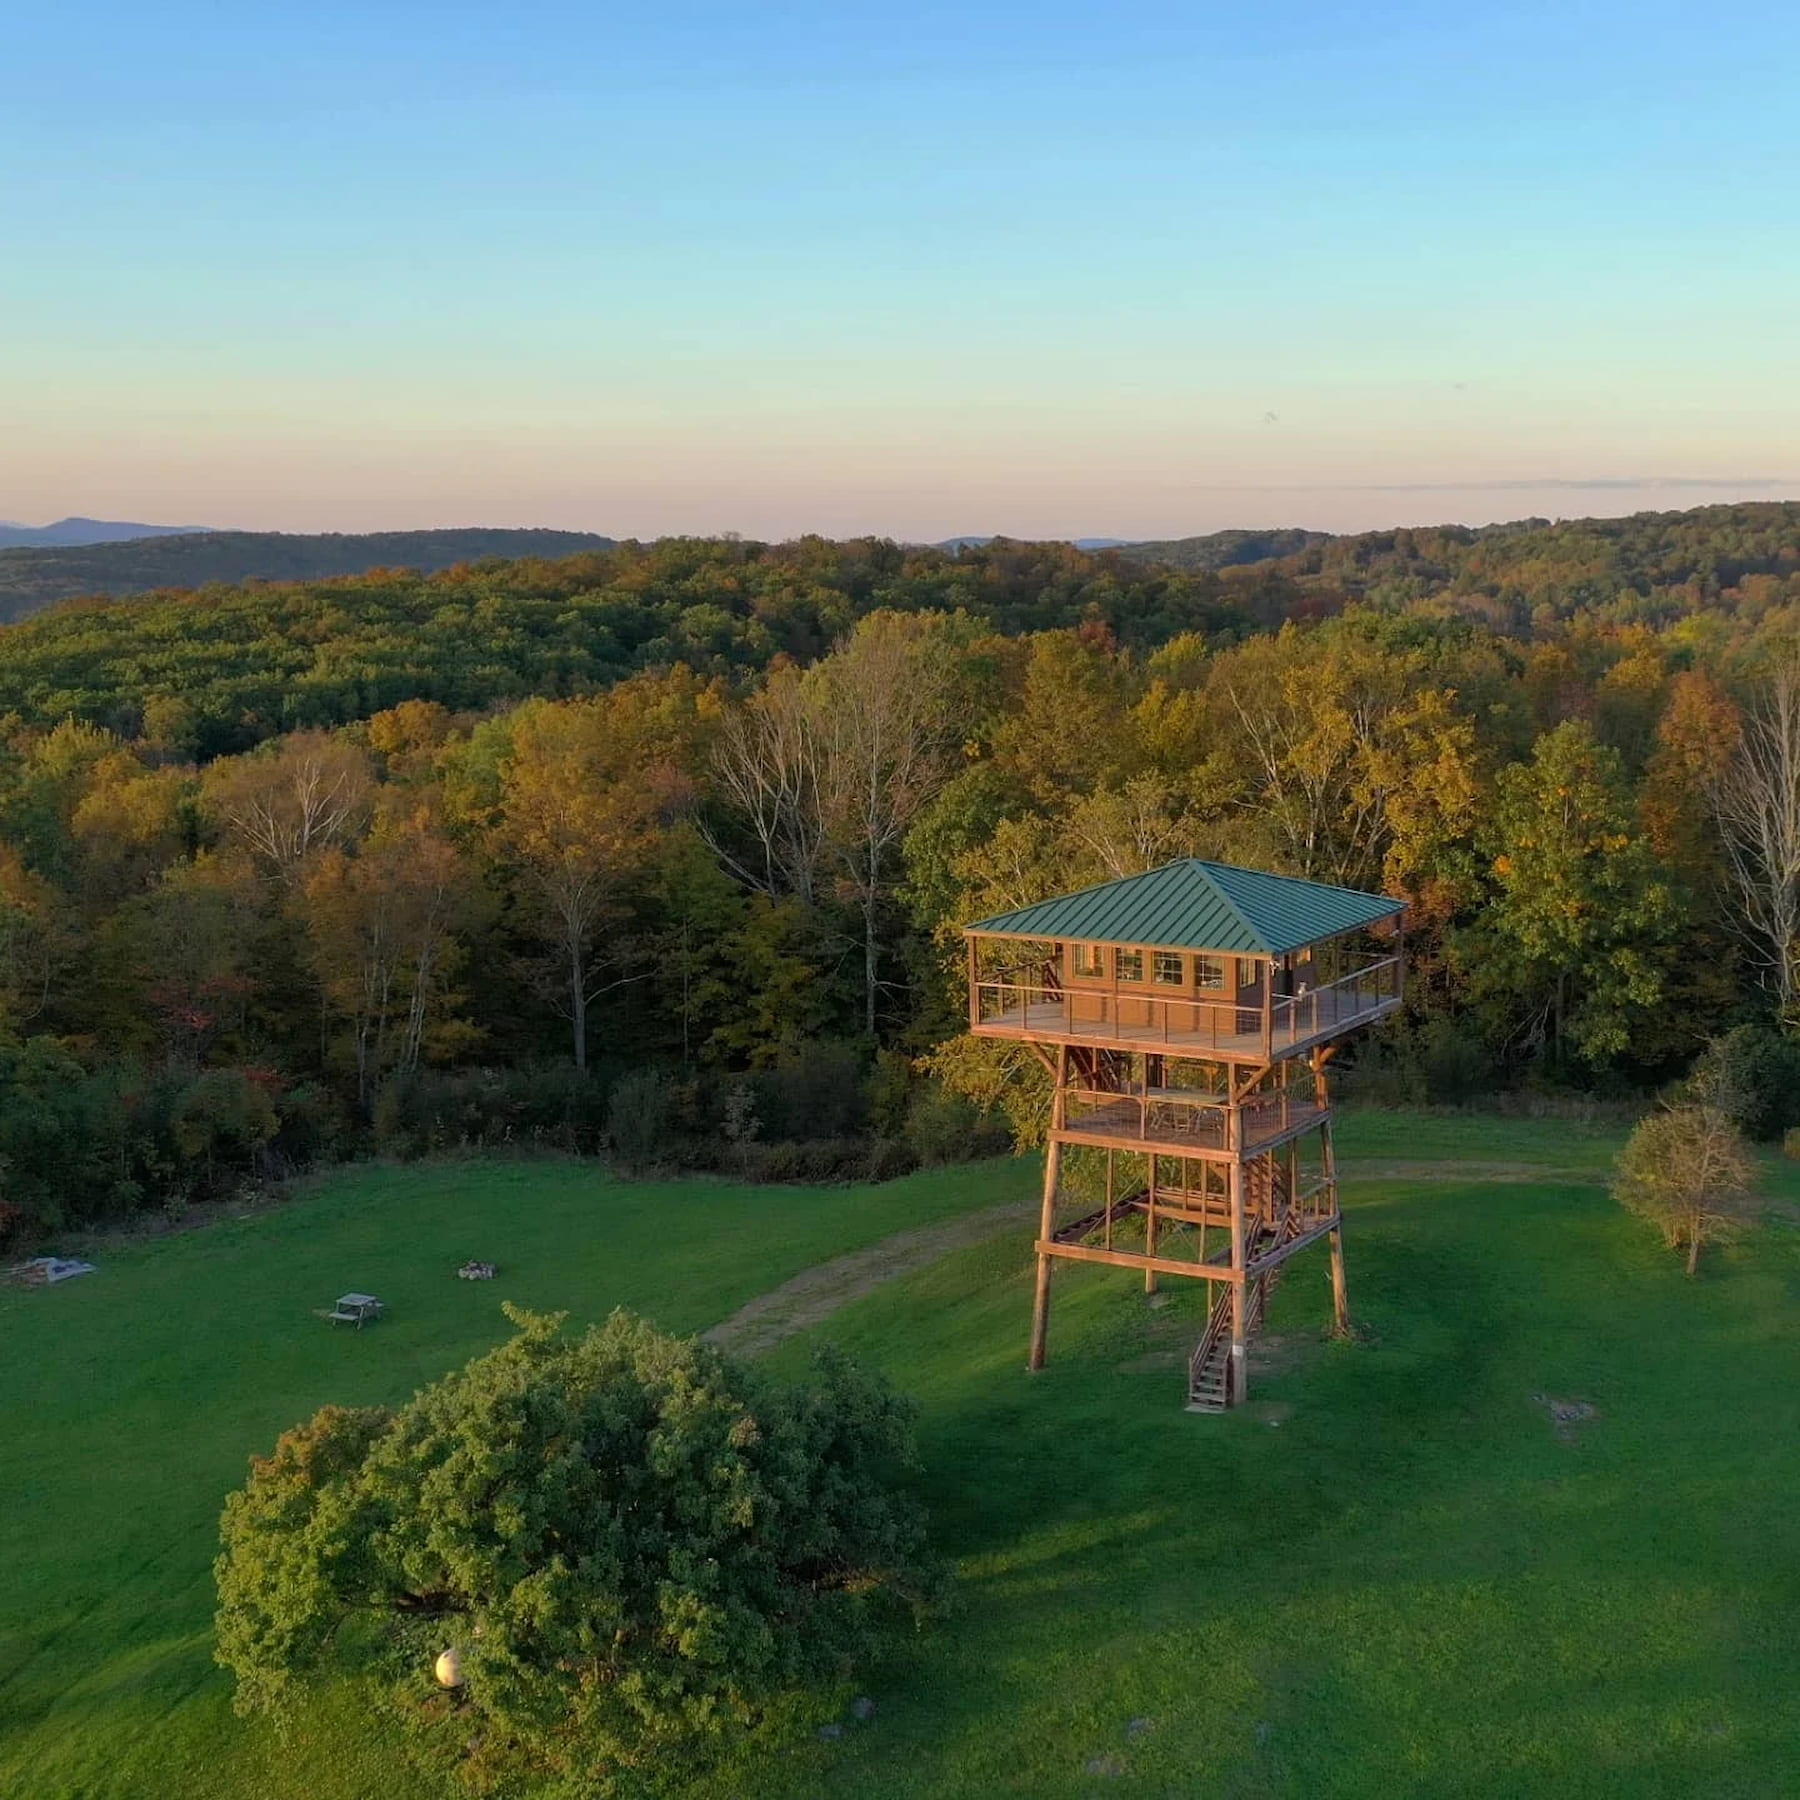 Slateville Fire Tower glamping tucked in the Adirondack Mountains.